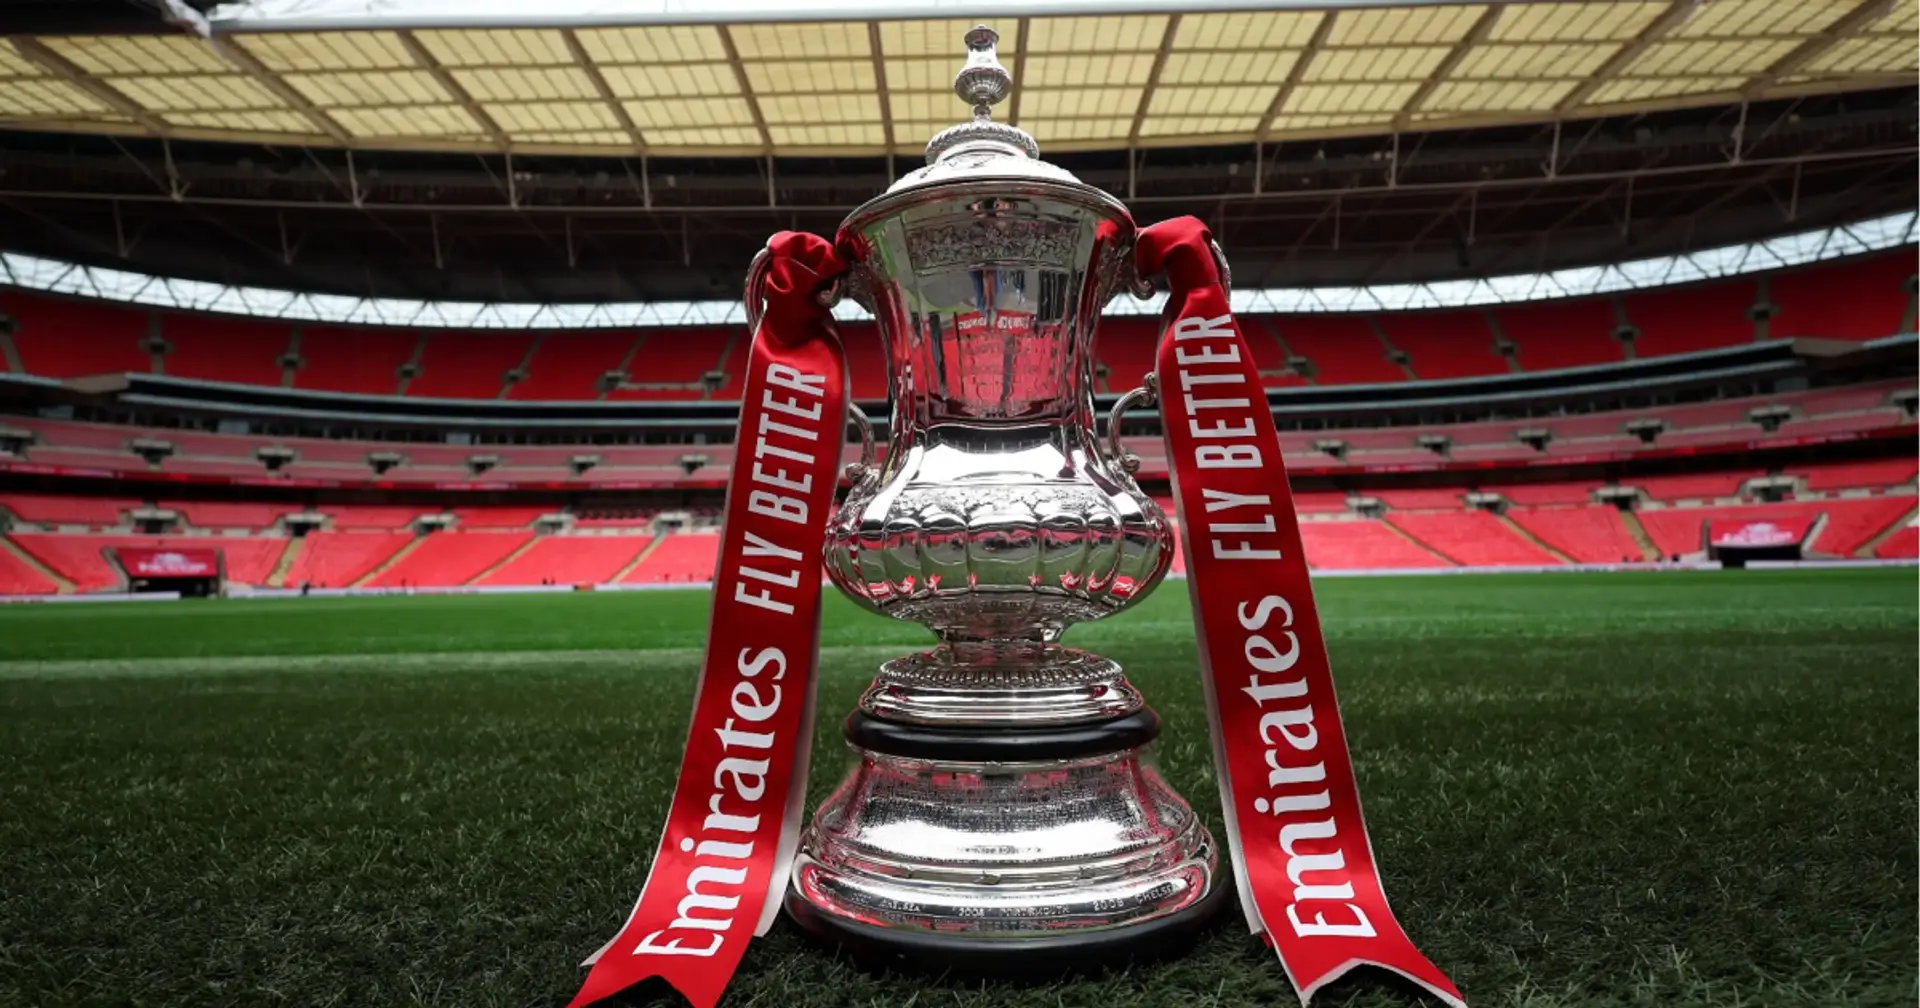 Liverpool learn FA Cup Fifth Round opponent, game to be played 3 days after League Cup final